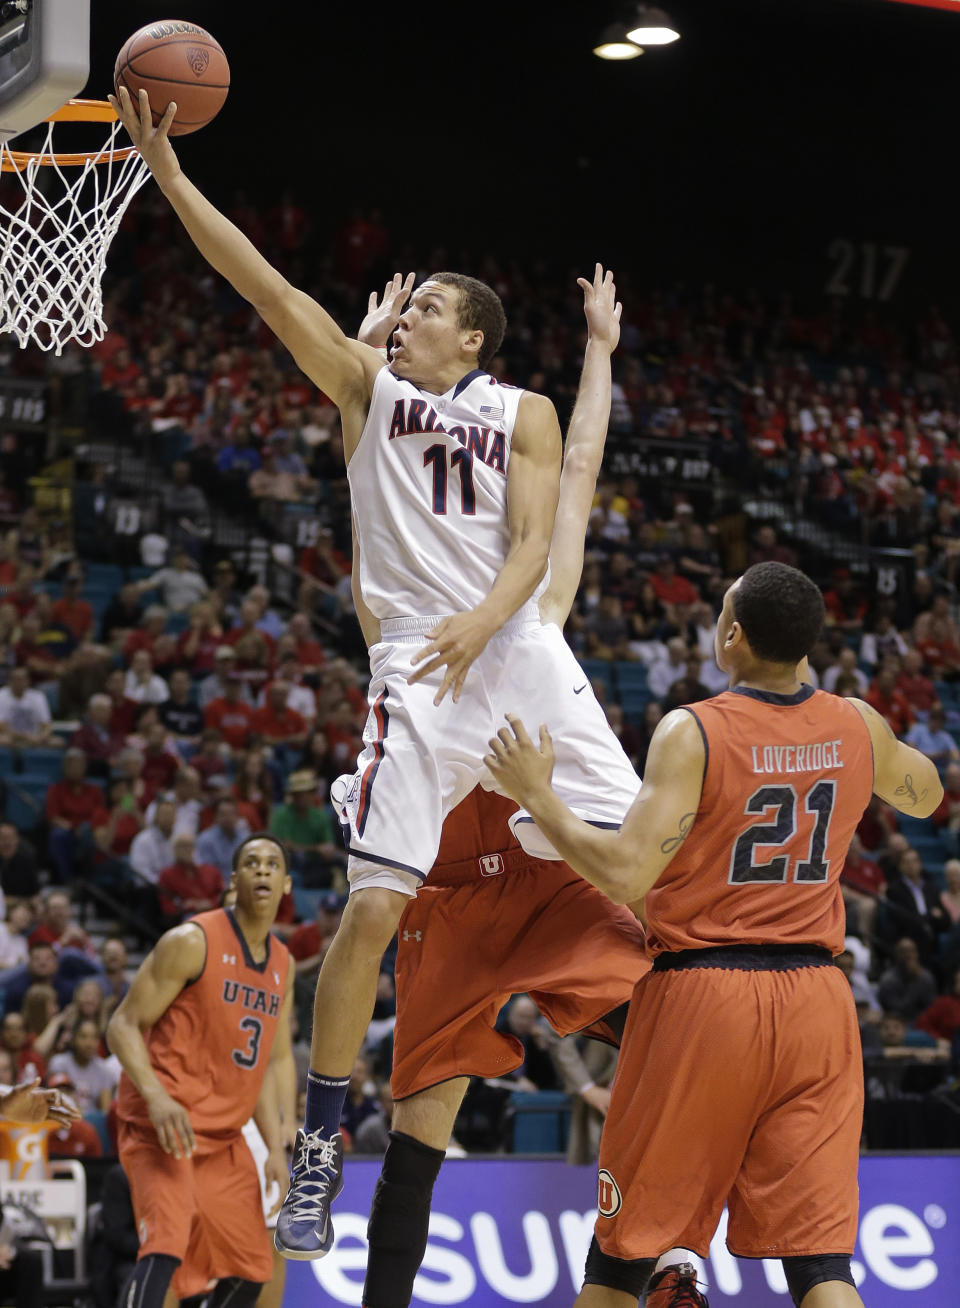 Arizona's Aaron Gordon (11) puts up a shot past Utah's Jordan Loveridge during the first half of an NCAA college basketball game in the quarterfinals of the Pac-12 Conference tournament, Thursday, March 13, 2014, in Las Vegas. (AP Photo/Julie Jacobson)